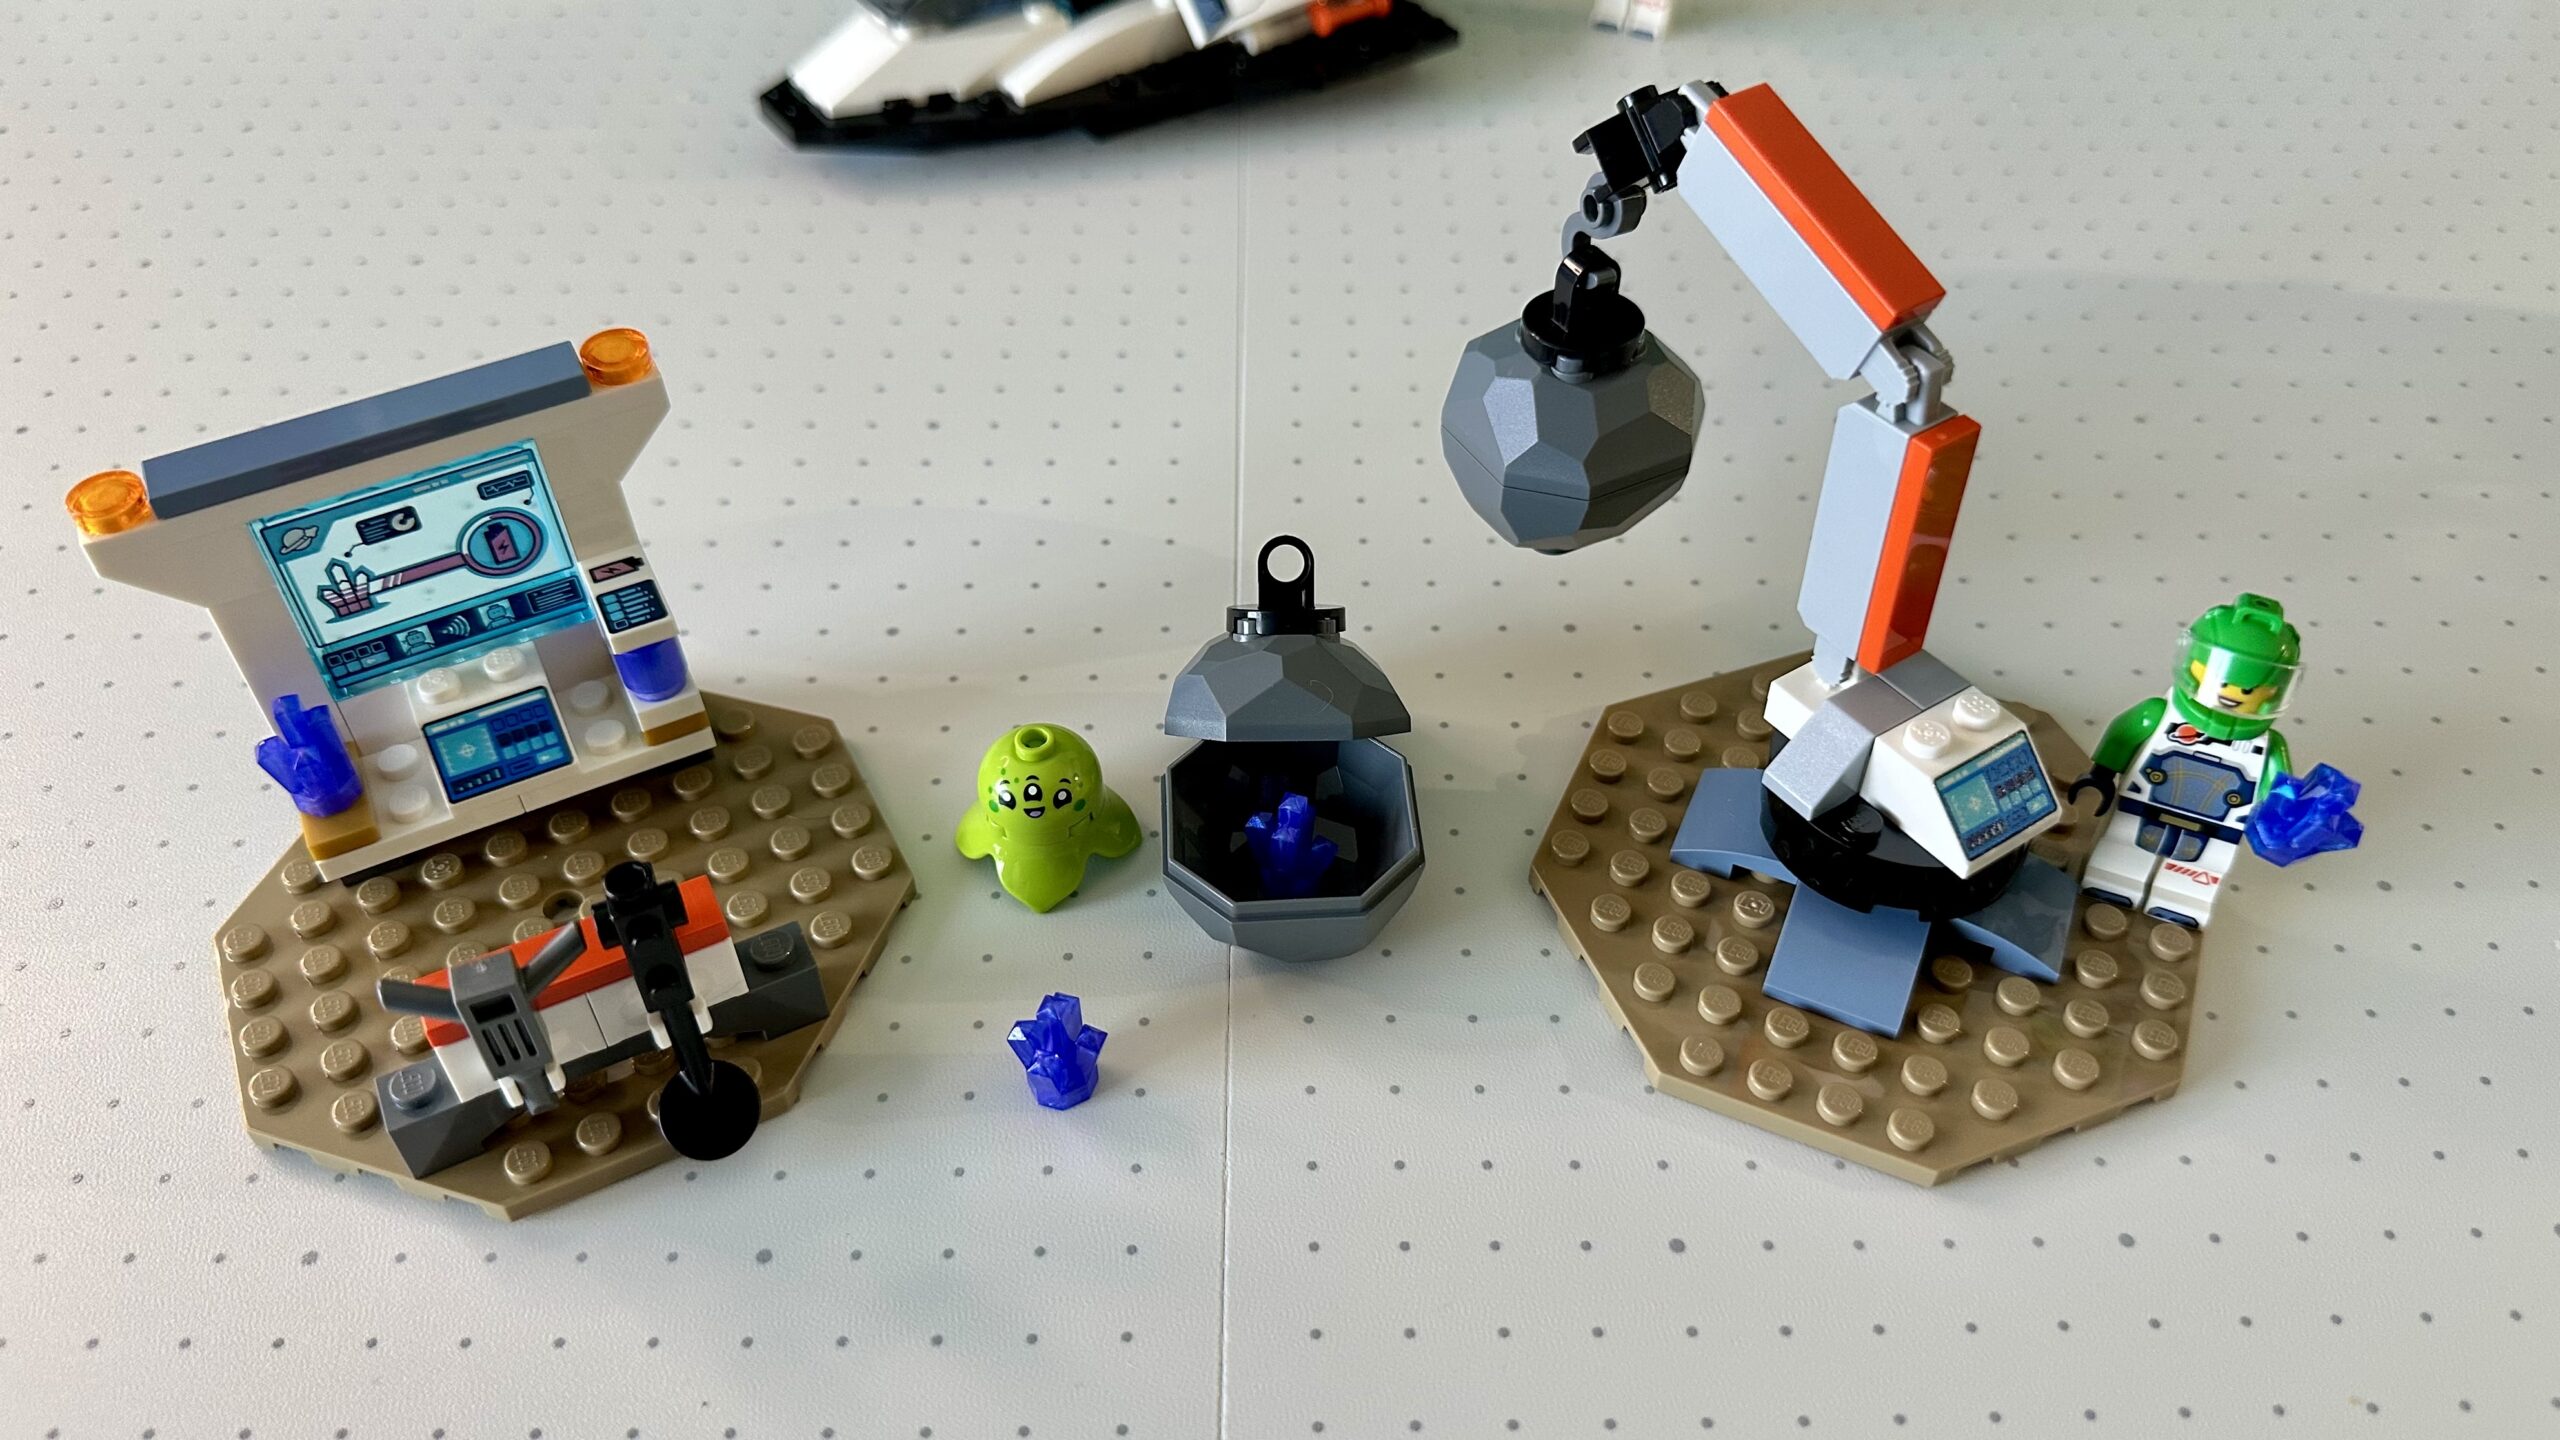 On the left is a science station with computer screen, a purple crystal, and a battery pack. In front of it is a small rack holding some tools. On the right is a crane lifting an asteroid. An astronaut in green and white stands next to it holding a purple crystal. In between are an asteroid cracked open to remove purple crystals inside and a chunky happy lime green alien.